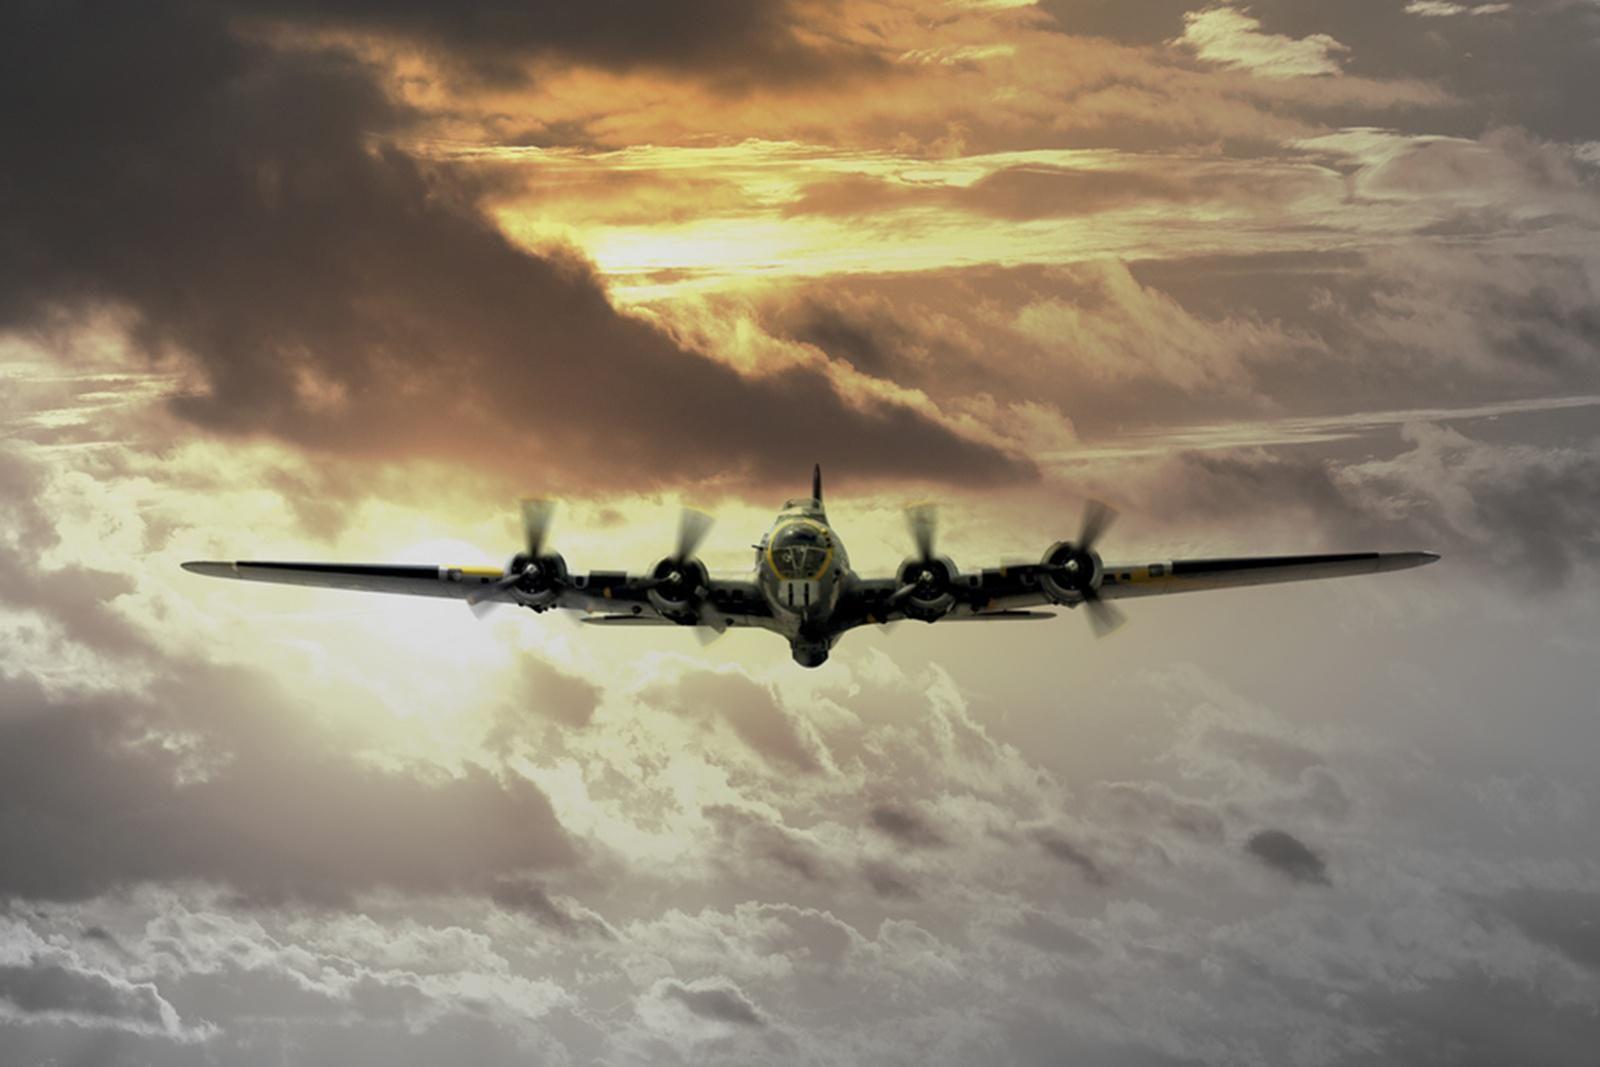 Wallpaper  park vehicle photography clouds airplane sun rays  military aircraft Boeing B 17 Flying Fortress legends air force  Aviator Flight aviation helicopter atmosphere of earth aircraft  engine rotorcraft 1600x900  nightelf87 